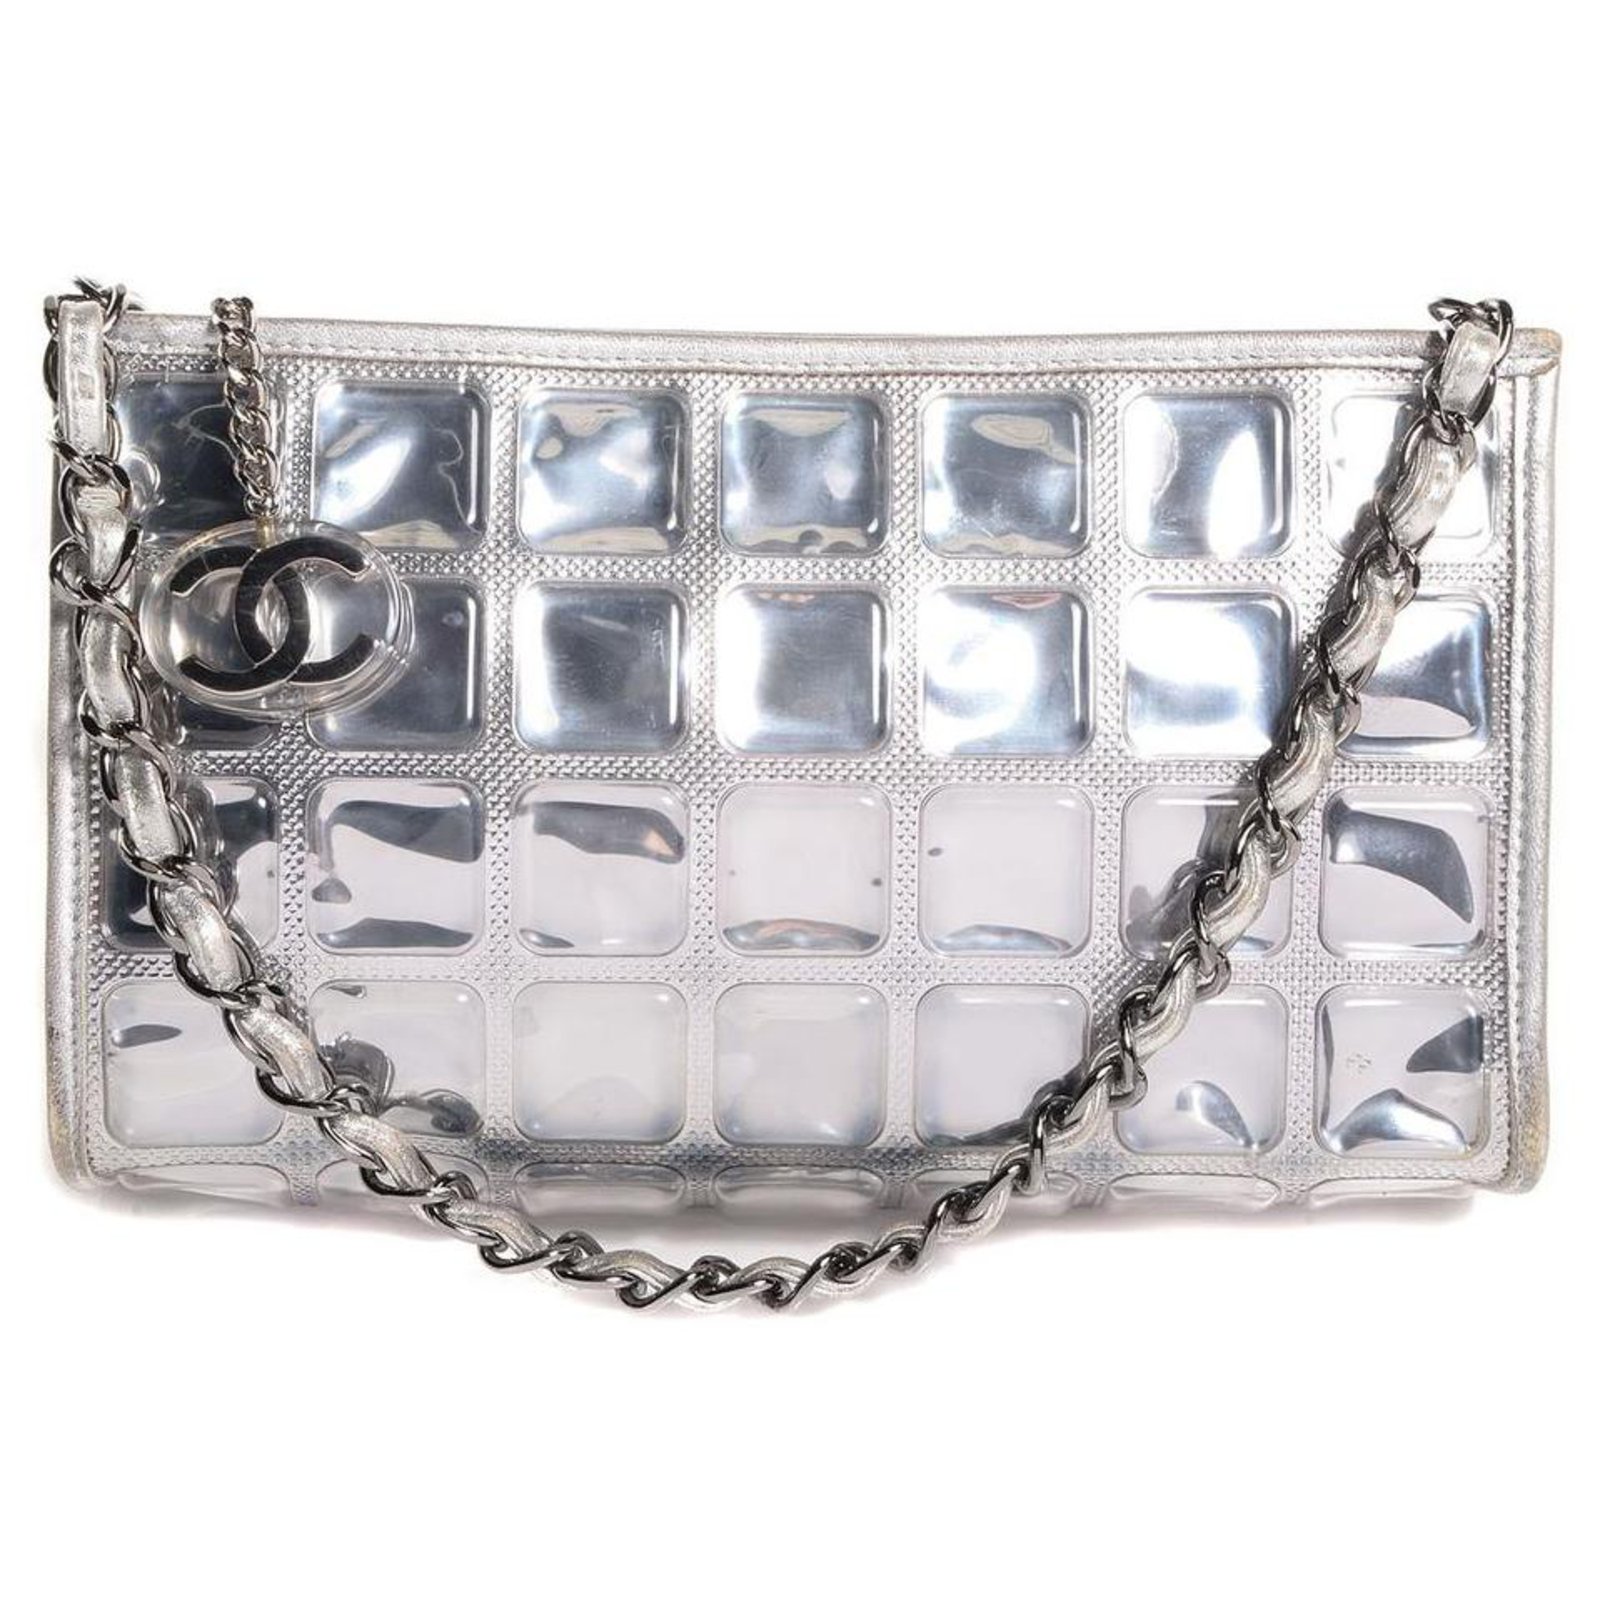 Chanel Silver Ice Cube Wristlet Chain Pouch Bag 861rl843 Leather